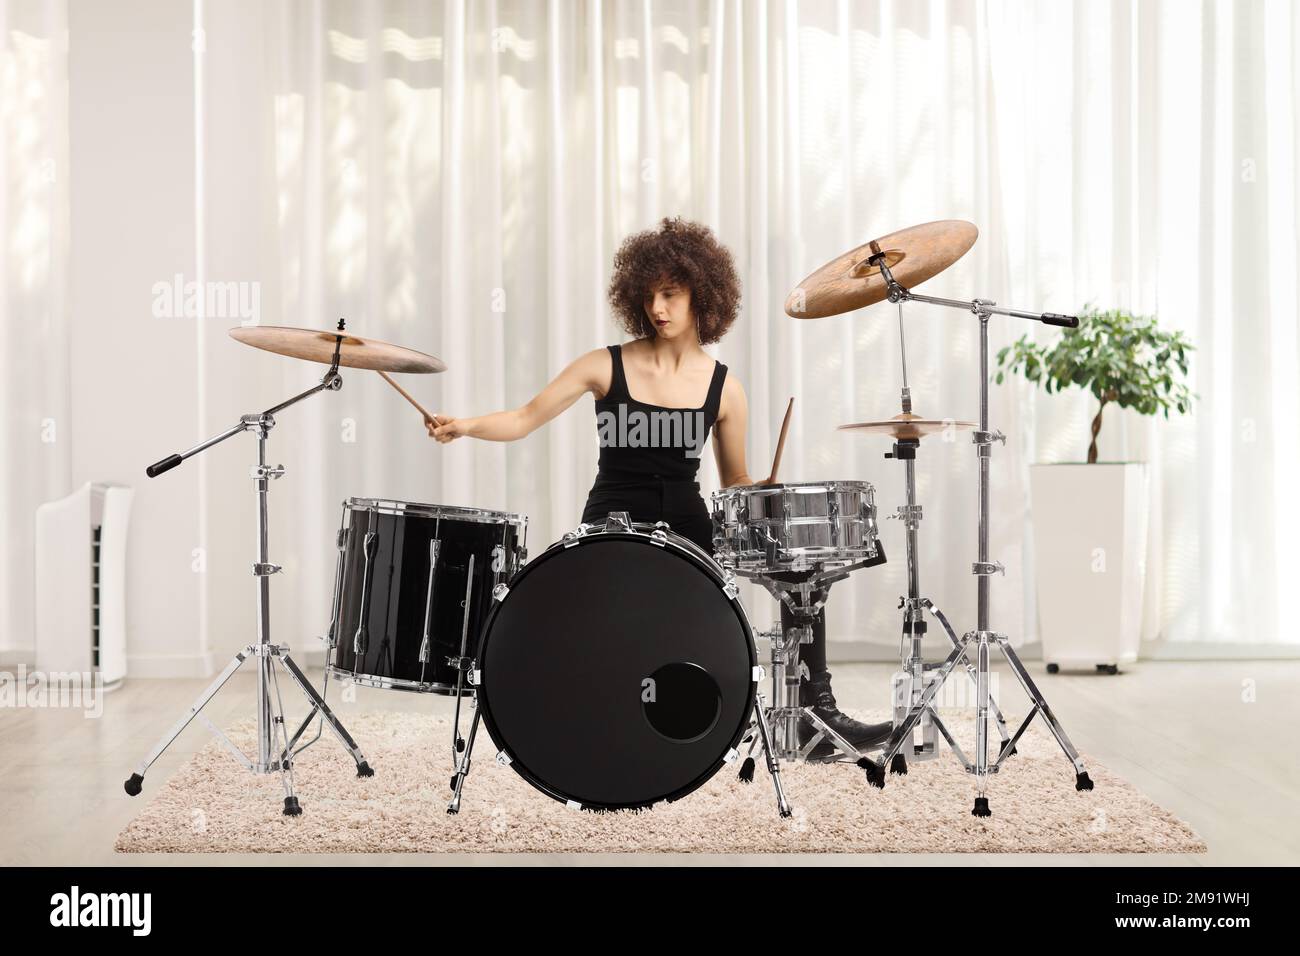 Young female playing drums inside a room Stock Photo